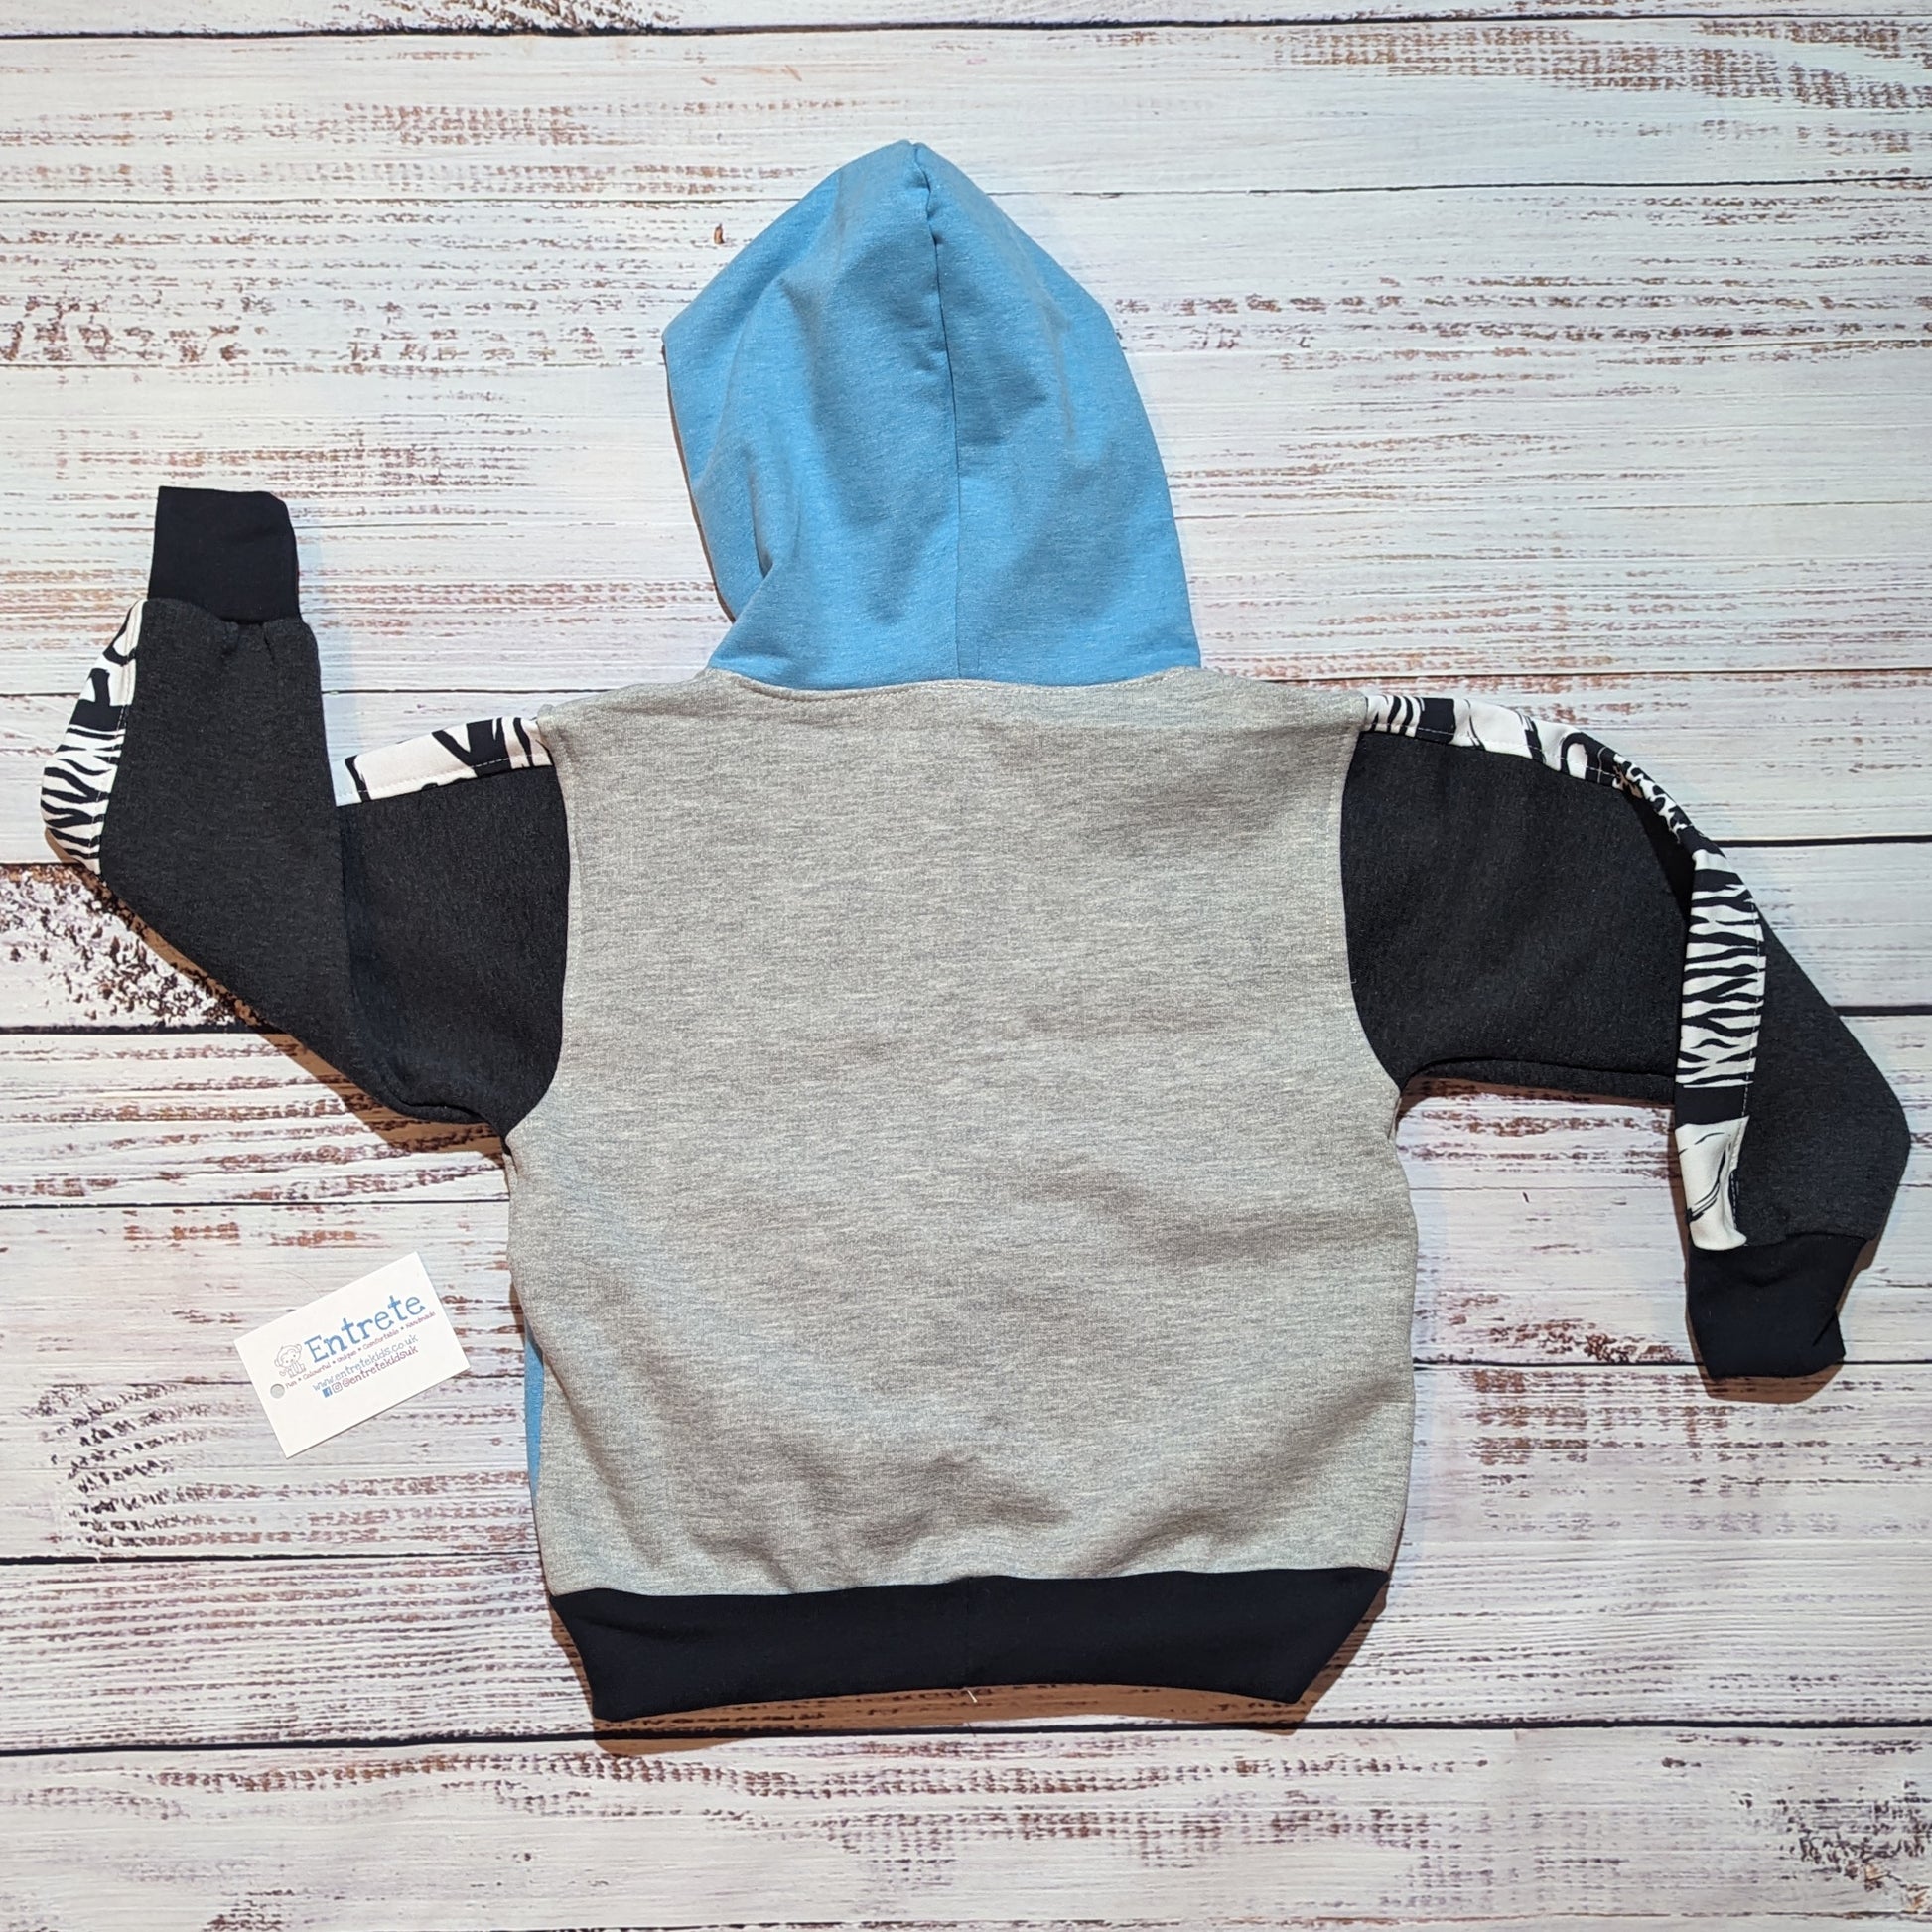 Sky blue, grey and animal hearts hoodie, with a zipped front pocket. Handmade using soft and comfortable cotton French terry. Shown from the rear.